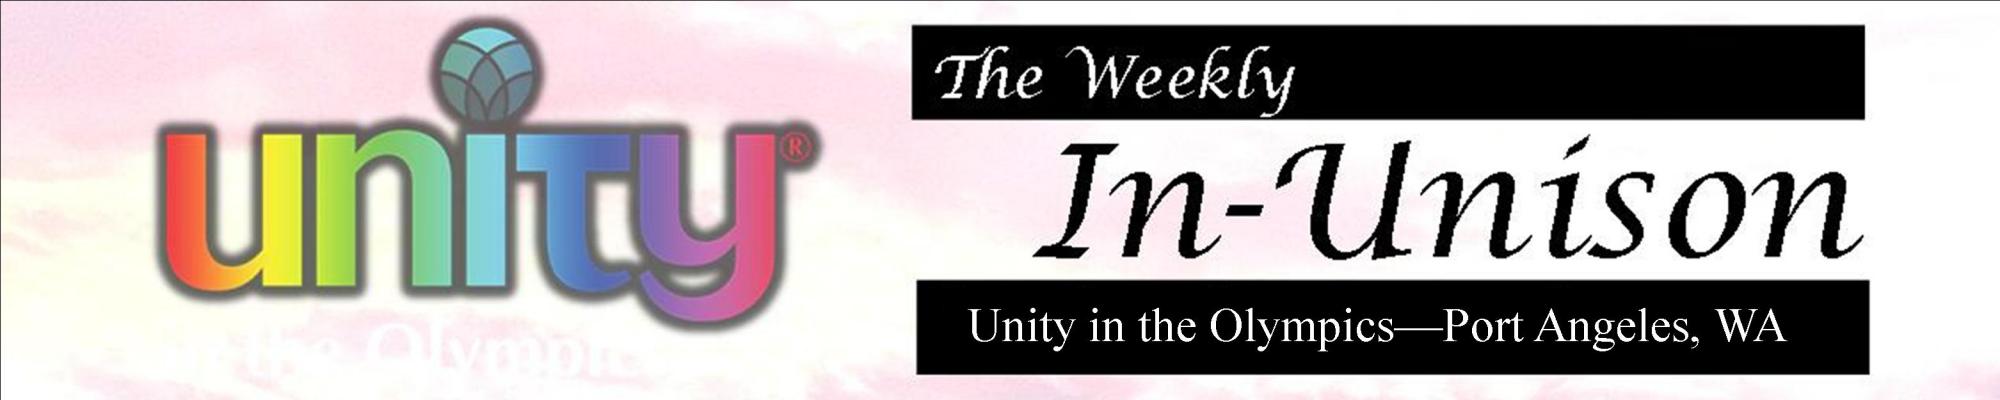 The Weekly IN-UNISON  Wednesday, November 22, 2023 Edition